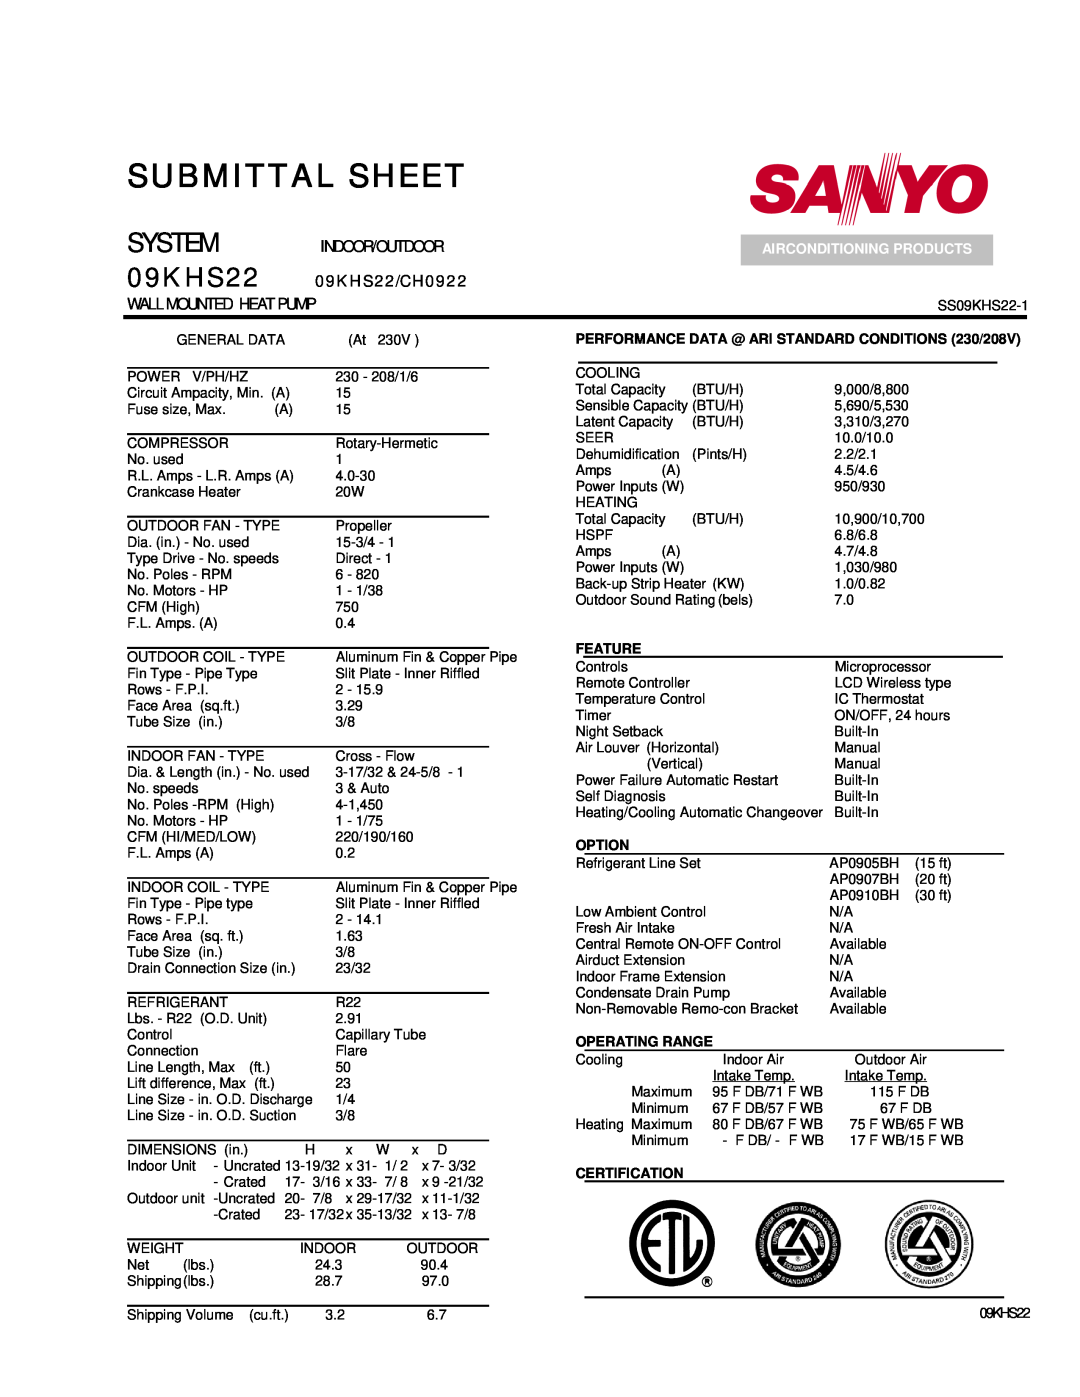 Sanyo dimensions 09KHS22/CH0922, Submittal Sheet, System, Indoor/Outdoor, Airconditioning Products, Feature, Option 